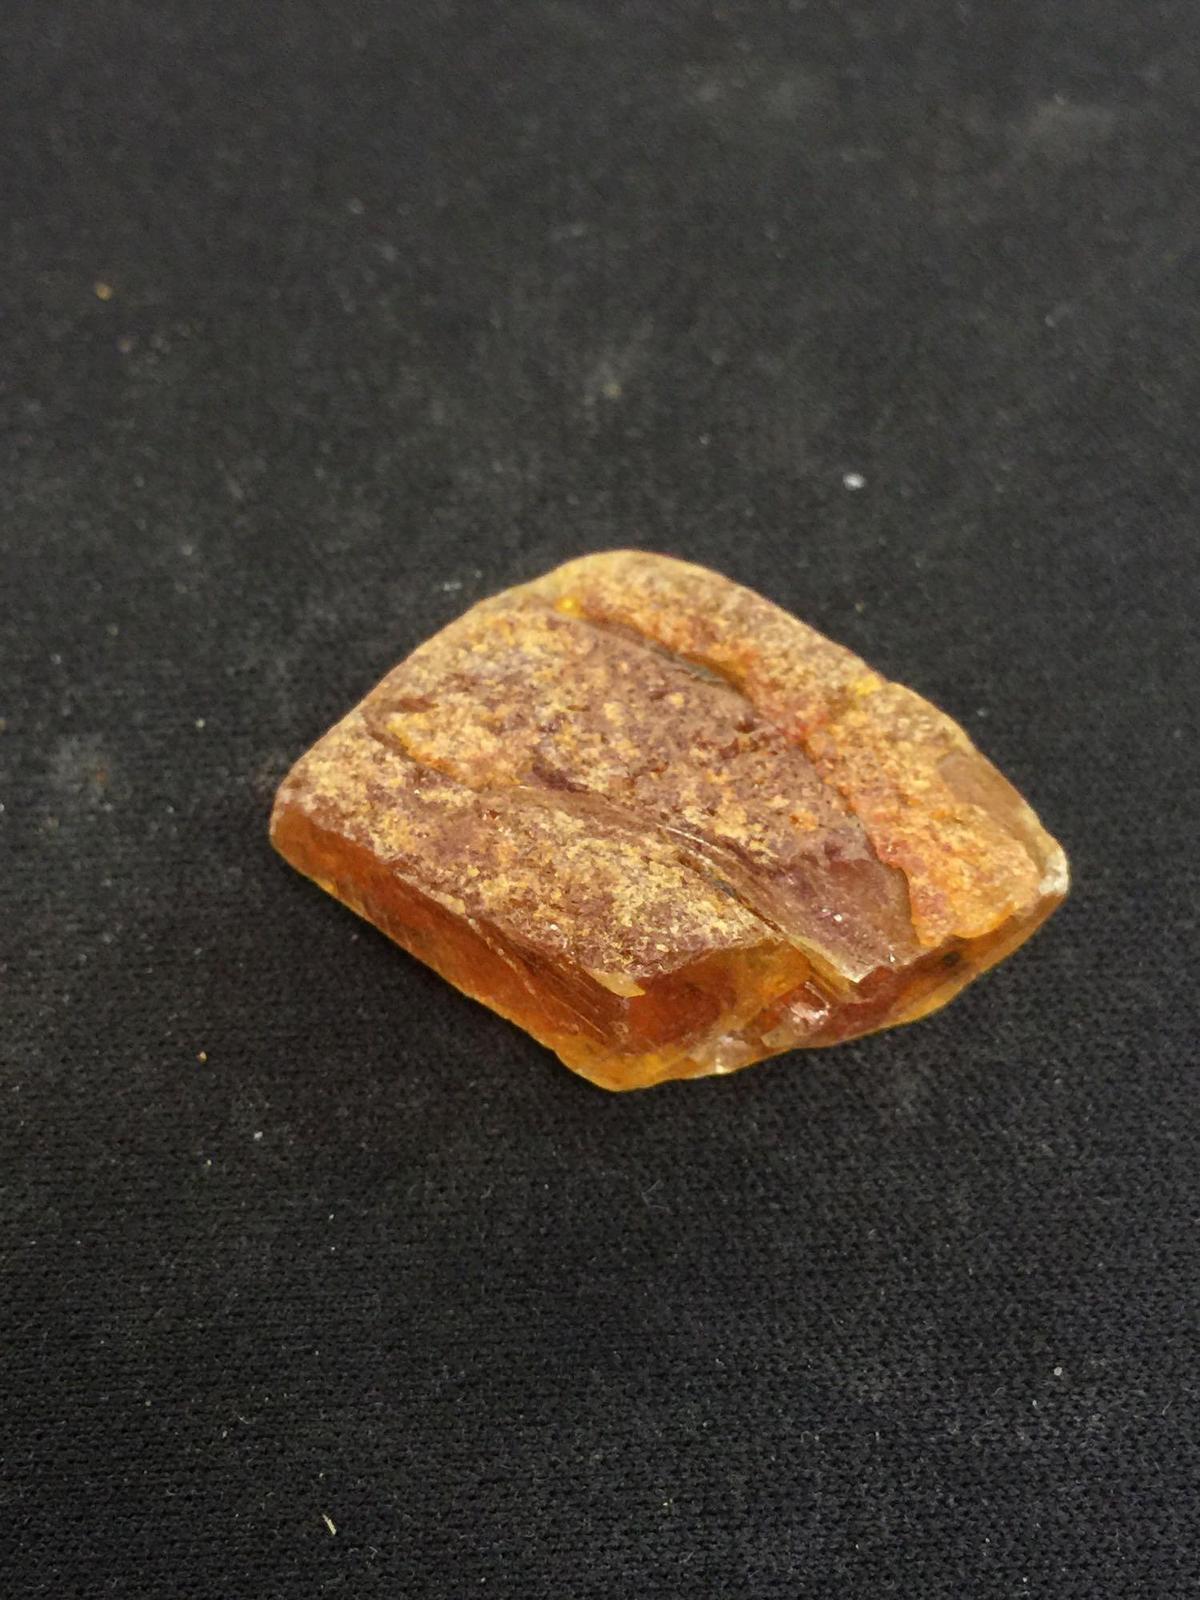 Unsearched & Unpolished Baltic Amber Piece - 3.0 grams